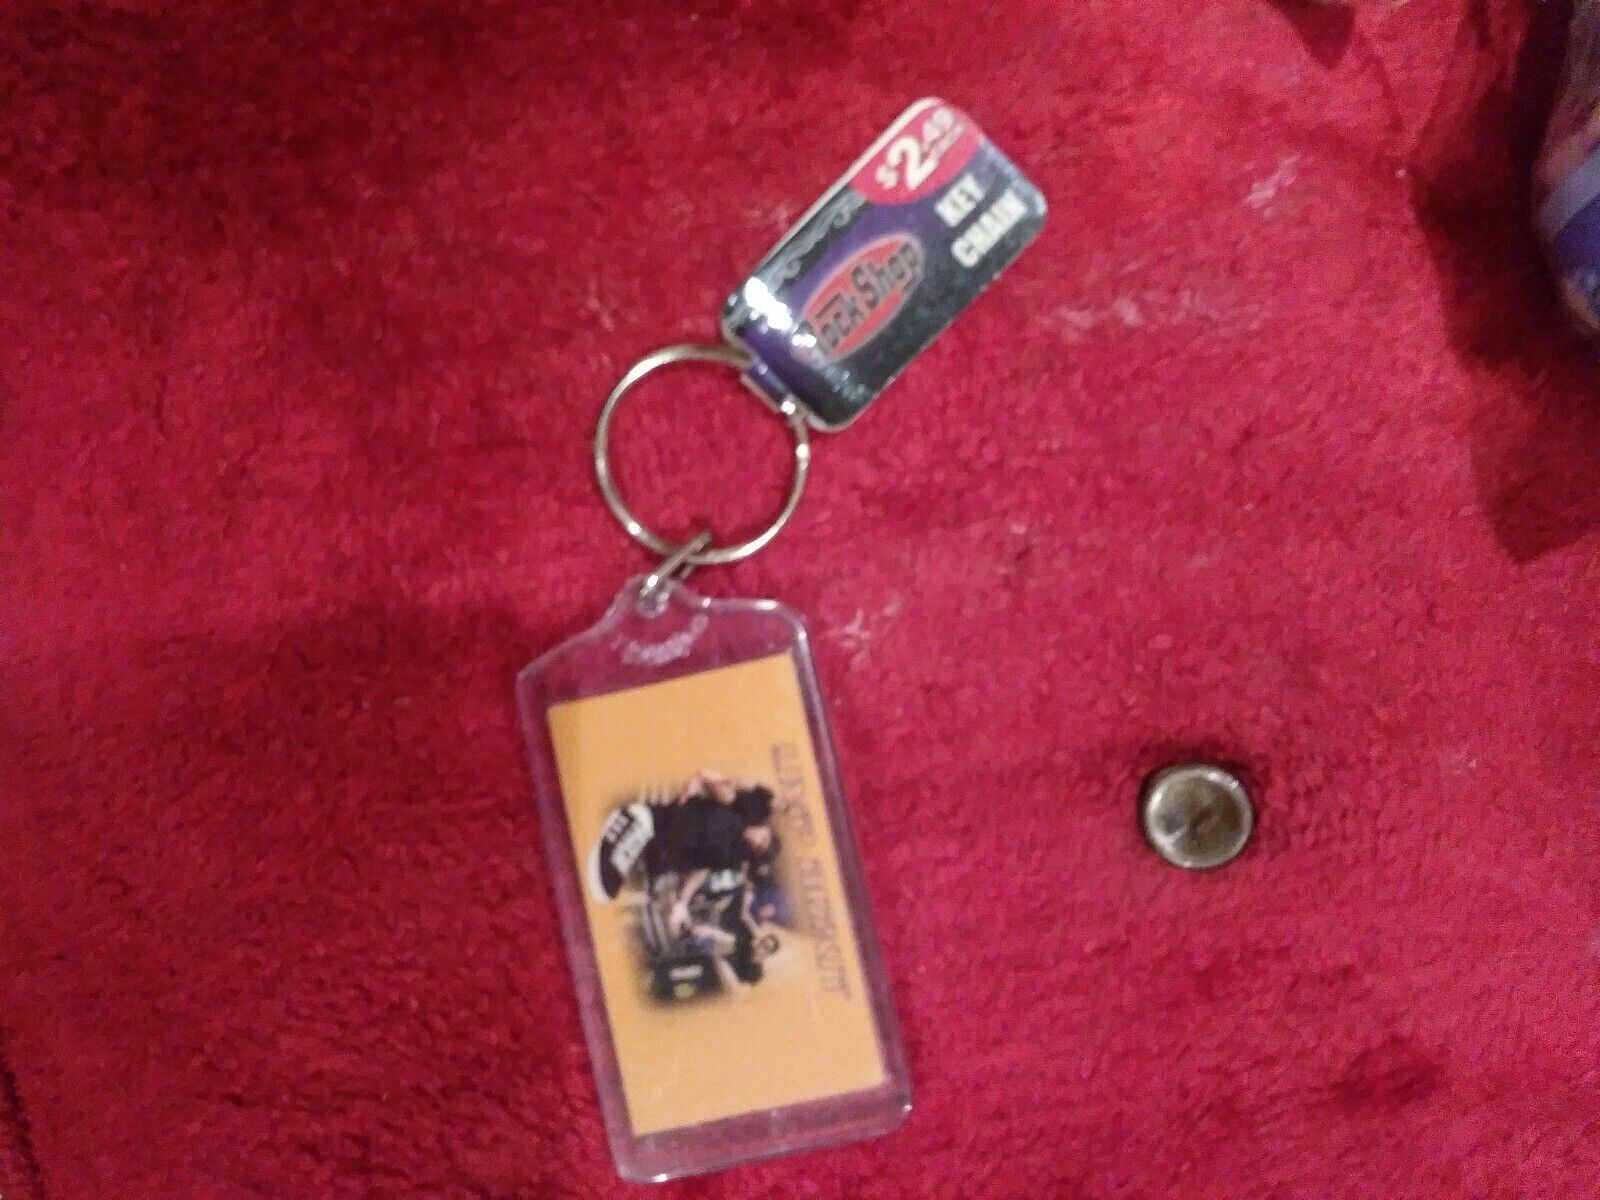 Nwt Limp Bizkit 2 Sided Keychain Each Side Is A Different Picture Bunny Group